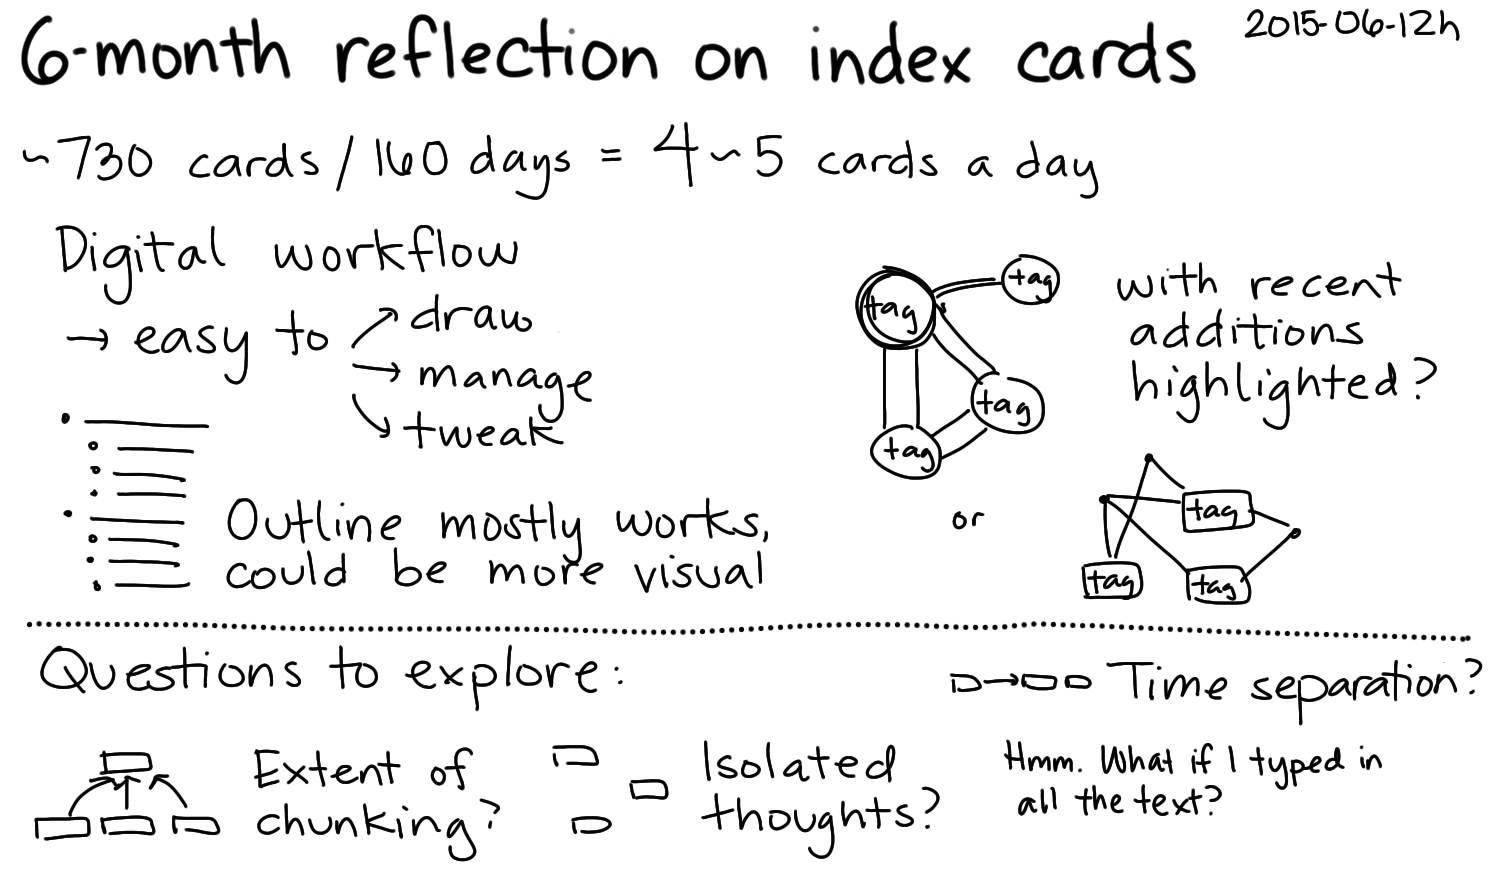 2015-06-12h 6-month reflection on index cards -- index card #index-cards #drawing #zettelkasten #chunking.png